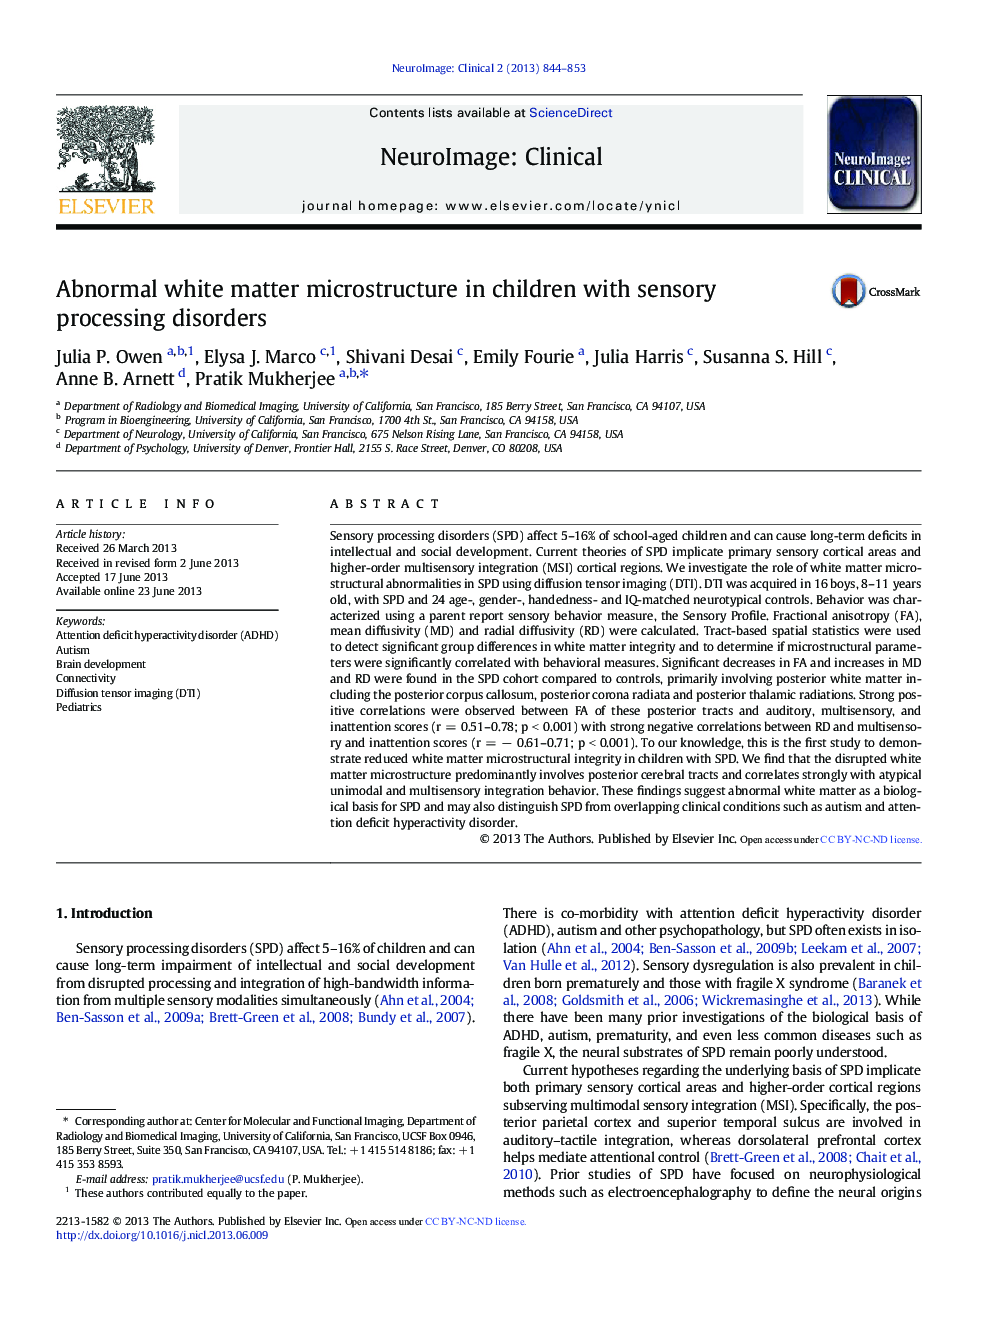 Abnormal white matter microstructure in children with sensory processing disorders